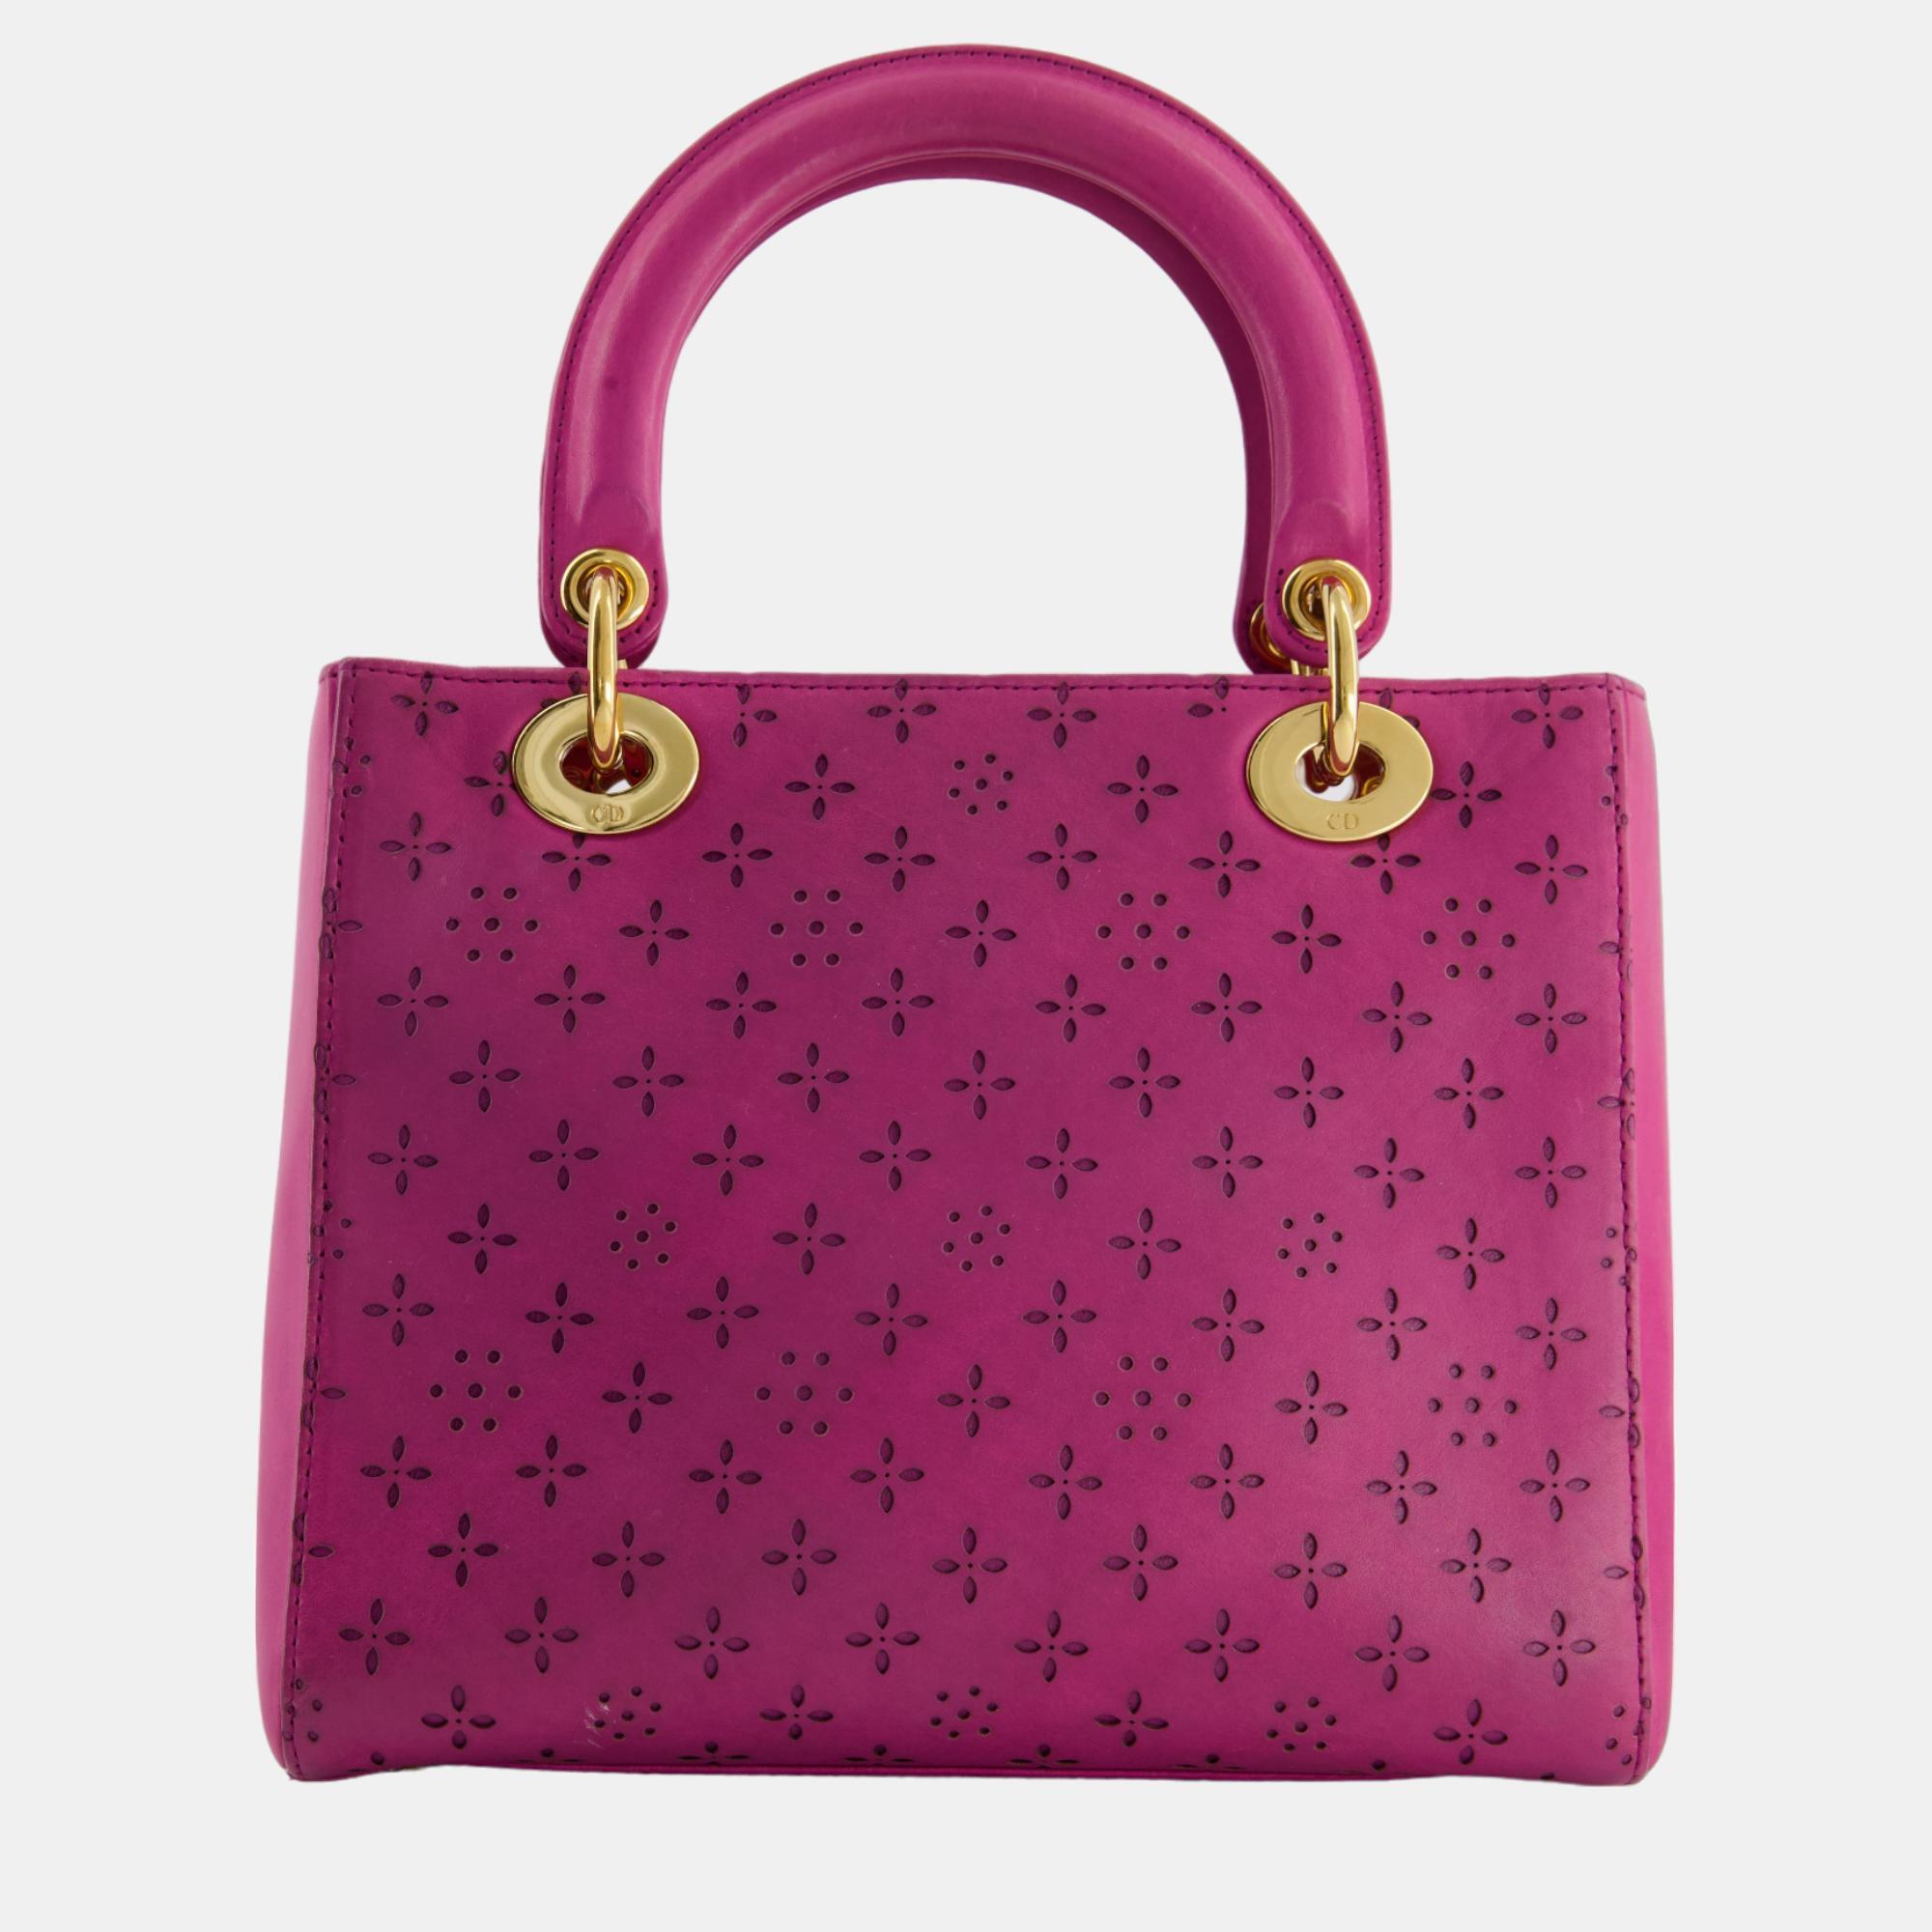 Christian Dior Vintage Medium Lady Dior Bag In Fuchsia Leather With Gold Hardware